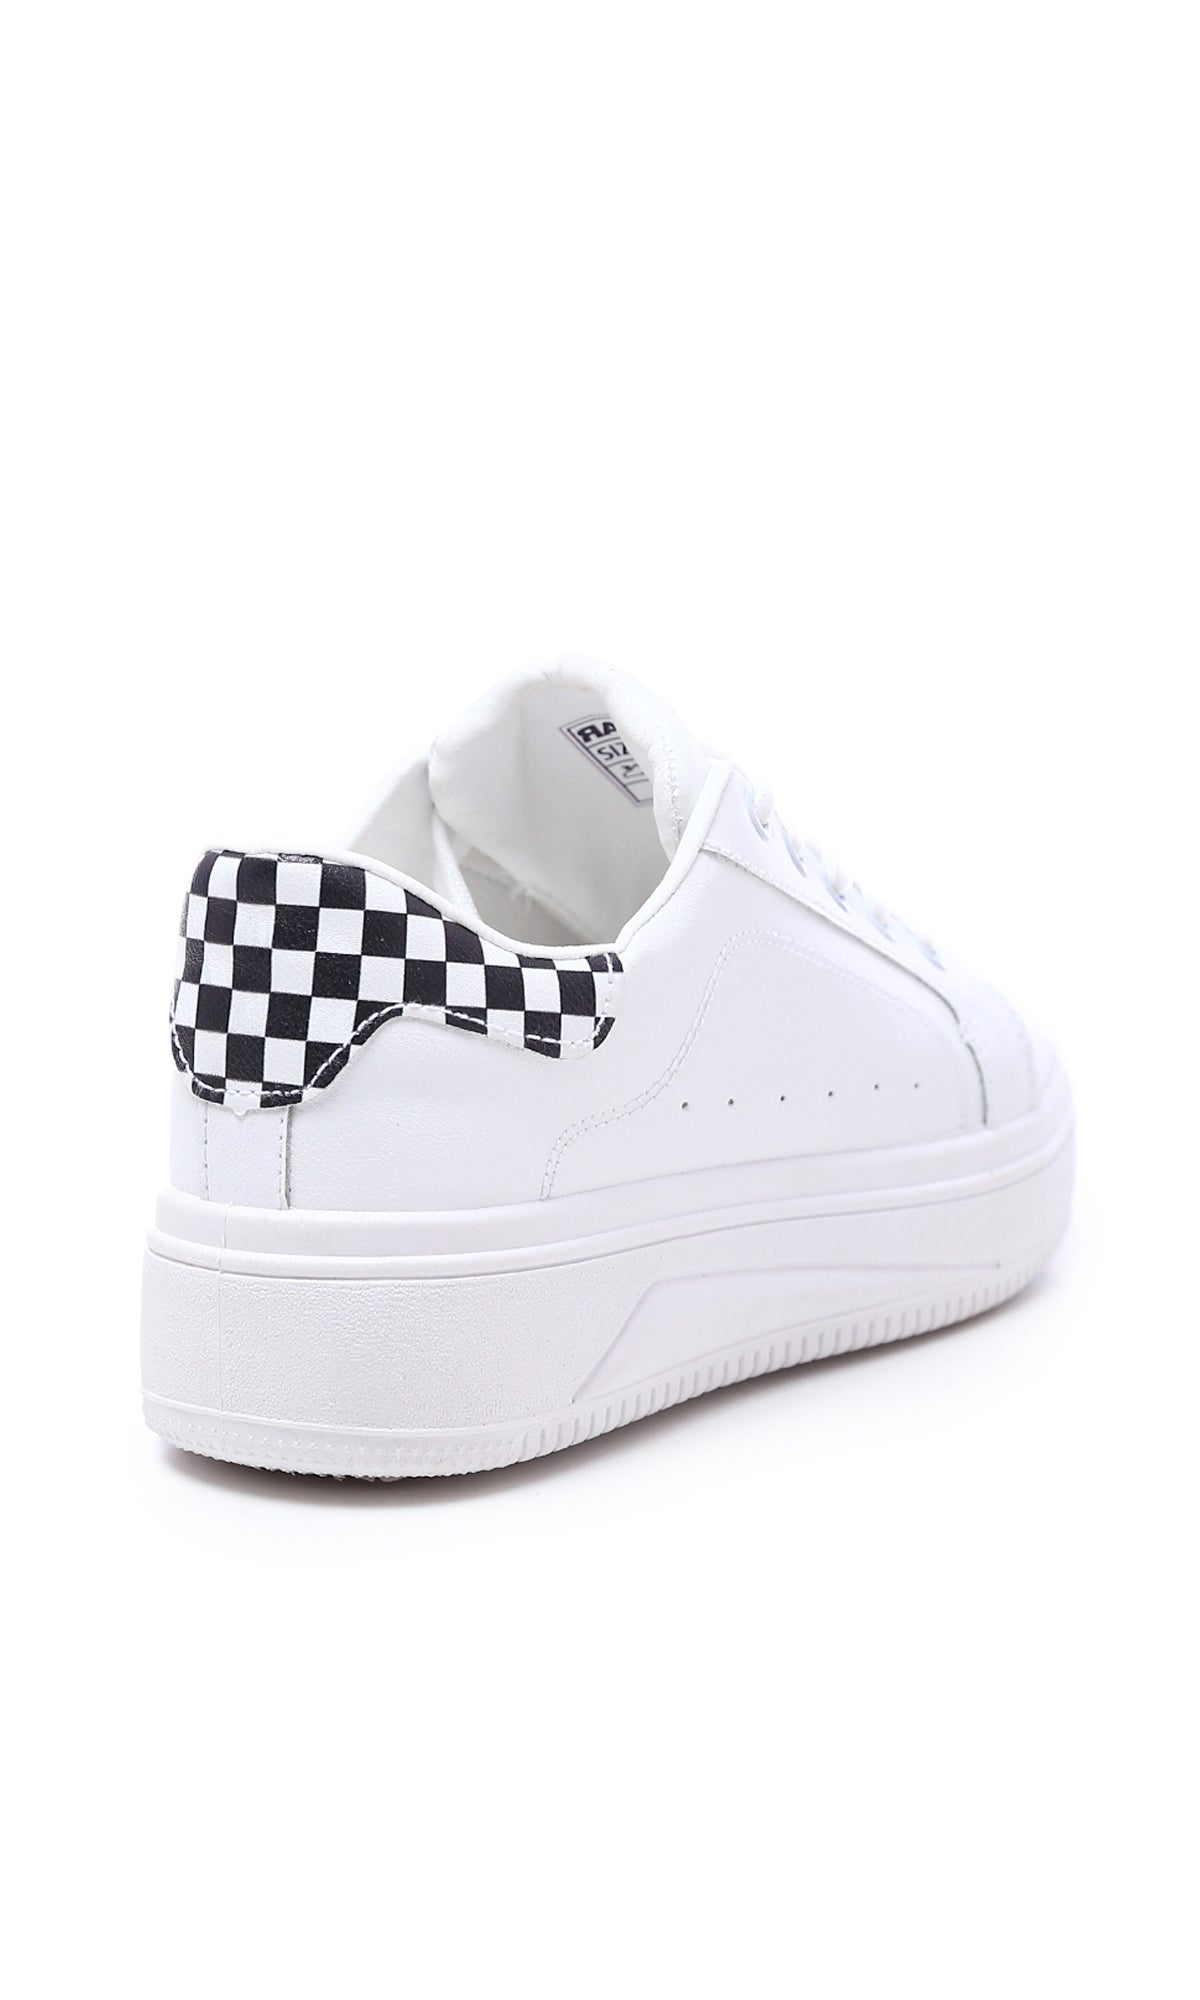 O177887 Round Toecap Sneakers With Checkered Back - White